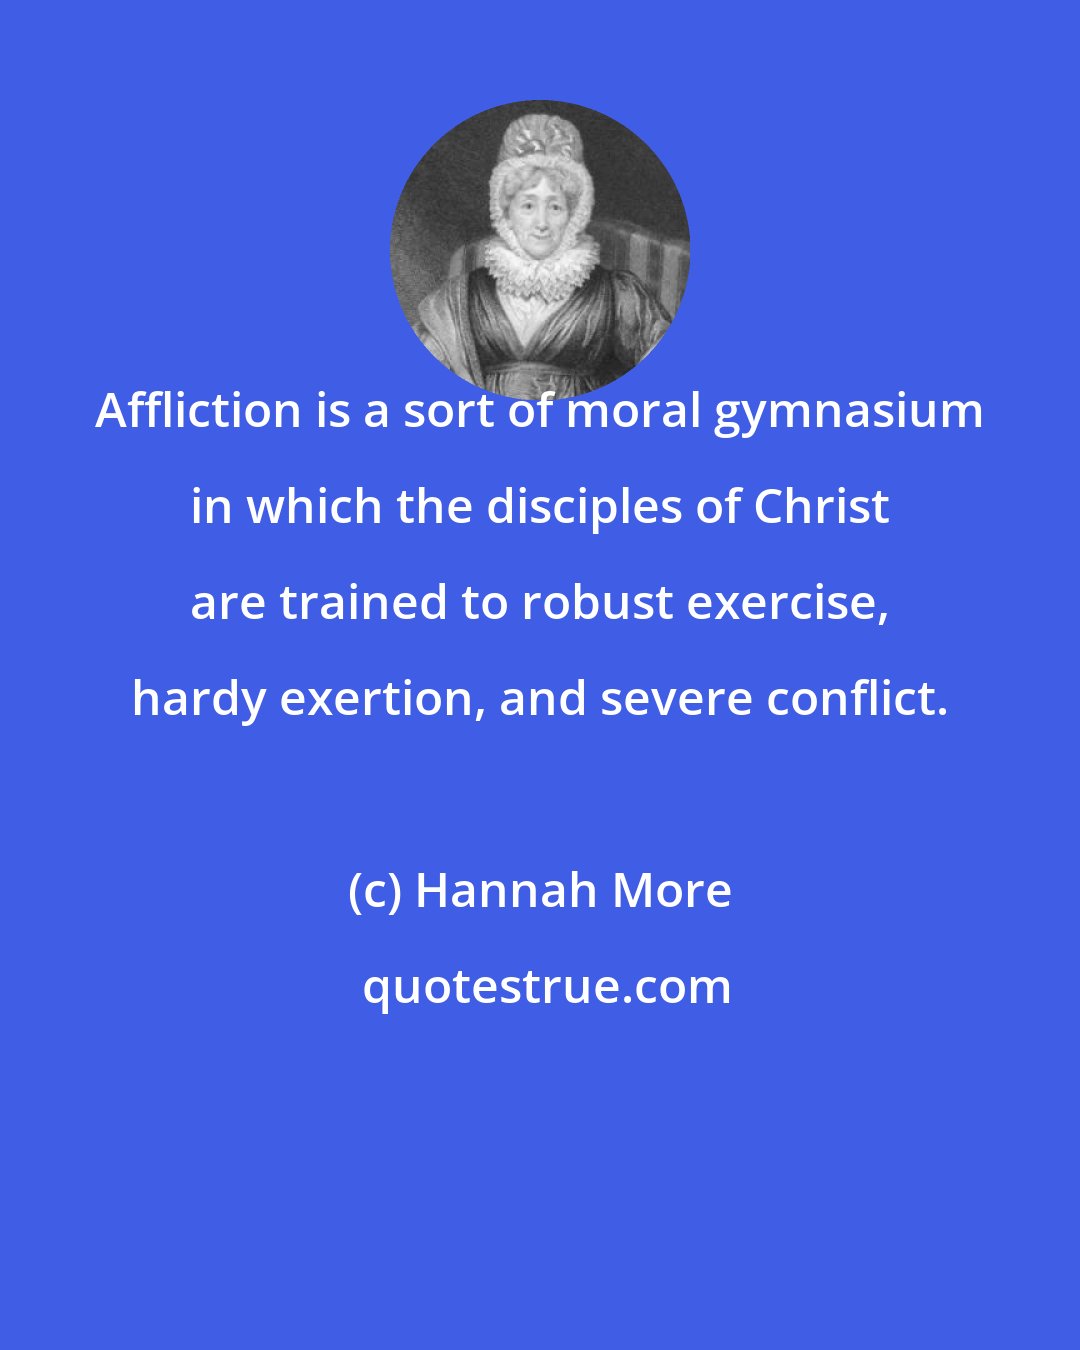 Hannah More: Affliction is a sort of moral gymnasium in which the disciples of Christ are trained to robust exercise, hardy exertion, and severe conflict.